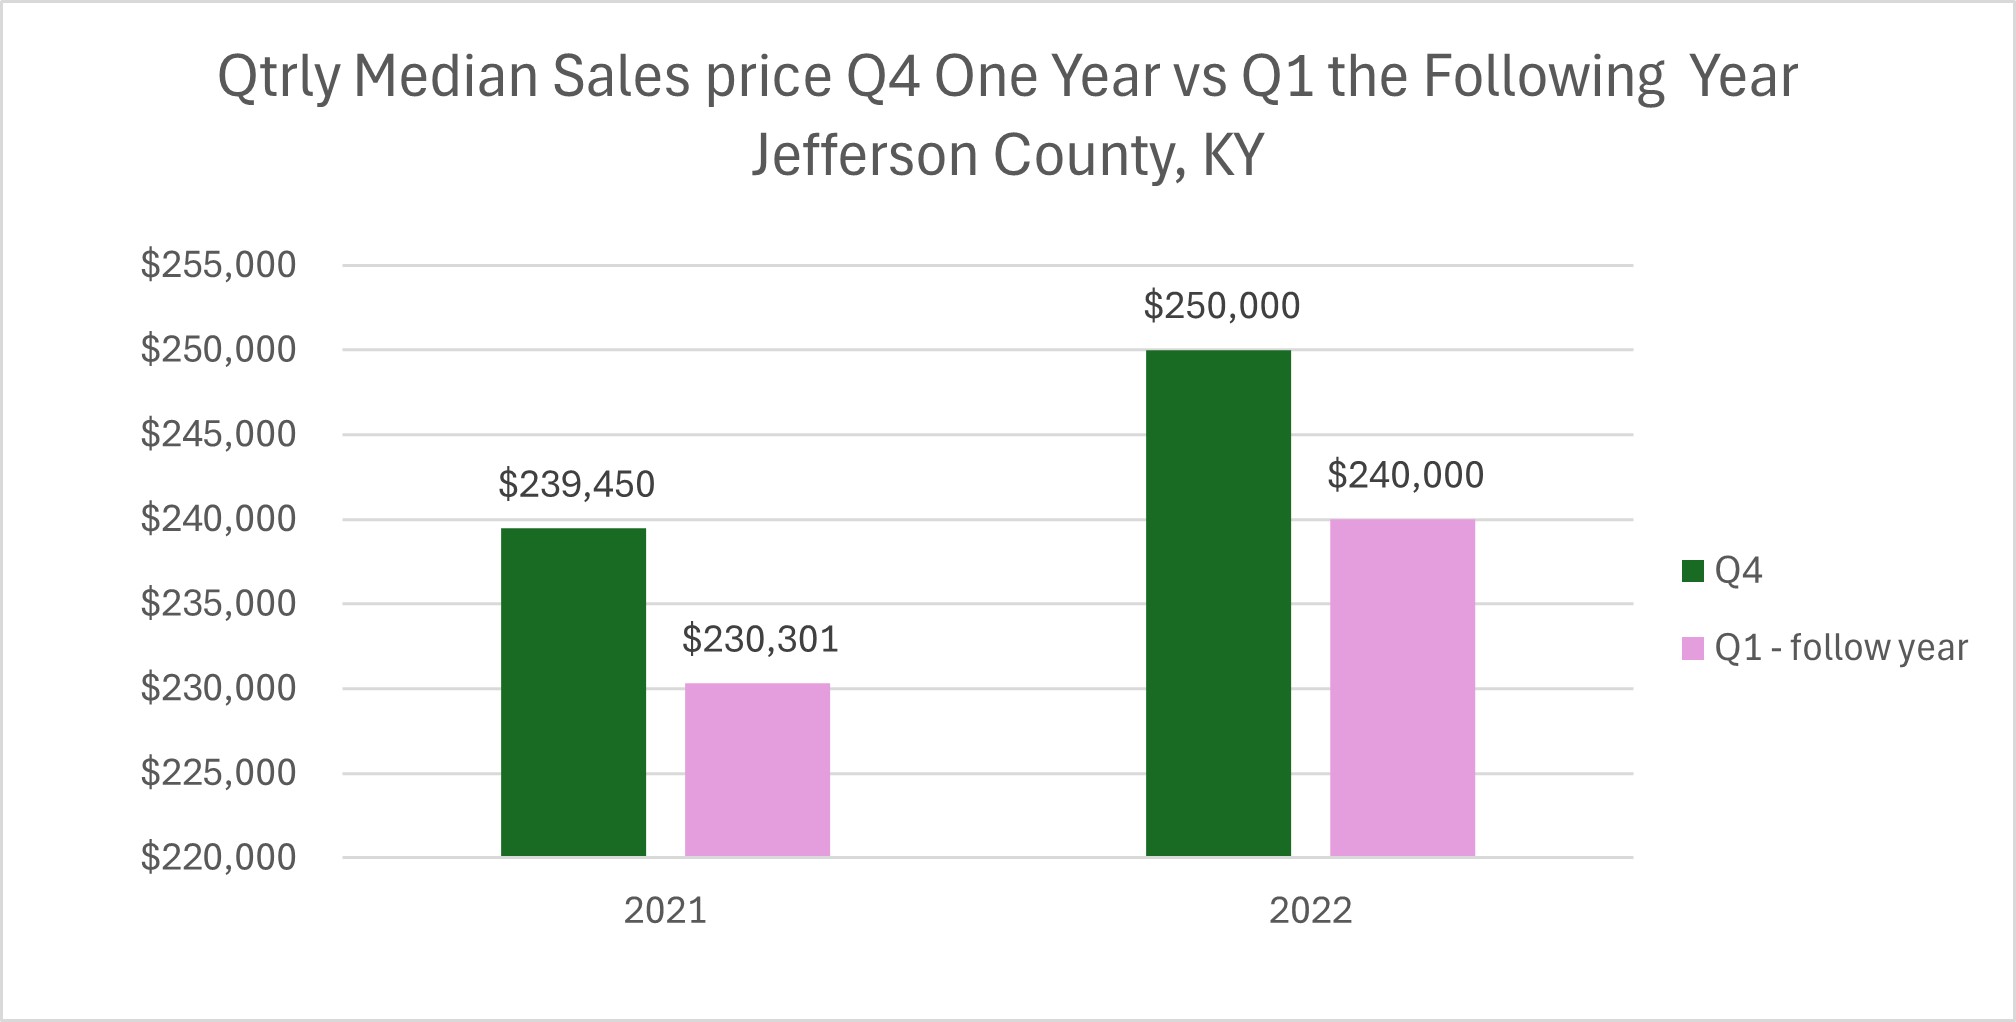 Bar chart showing the quarterly median sales price comparison for Q4 of one year to Q1 of the following year in Jefferson County, KY. The chart indicates a decrease from Q4 2021's median sales price of $239,450 to Q1 2022's $230,301, followed by an increase to $240,000 in Q1 2023. This trend suggests a seasonal variation in median sale prices for single-family homes. Data sourced from www.choiceappraisals.org.